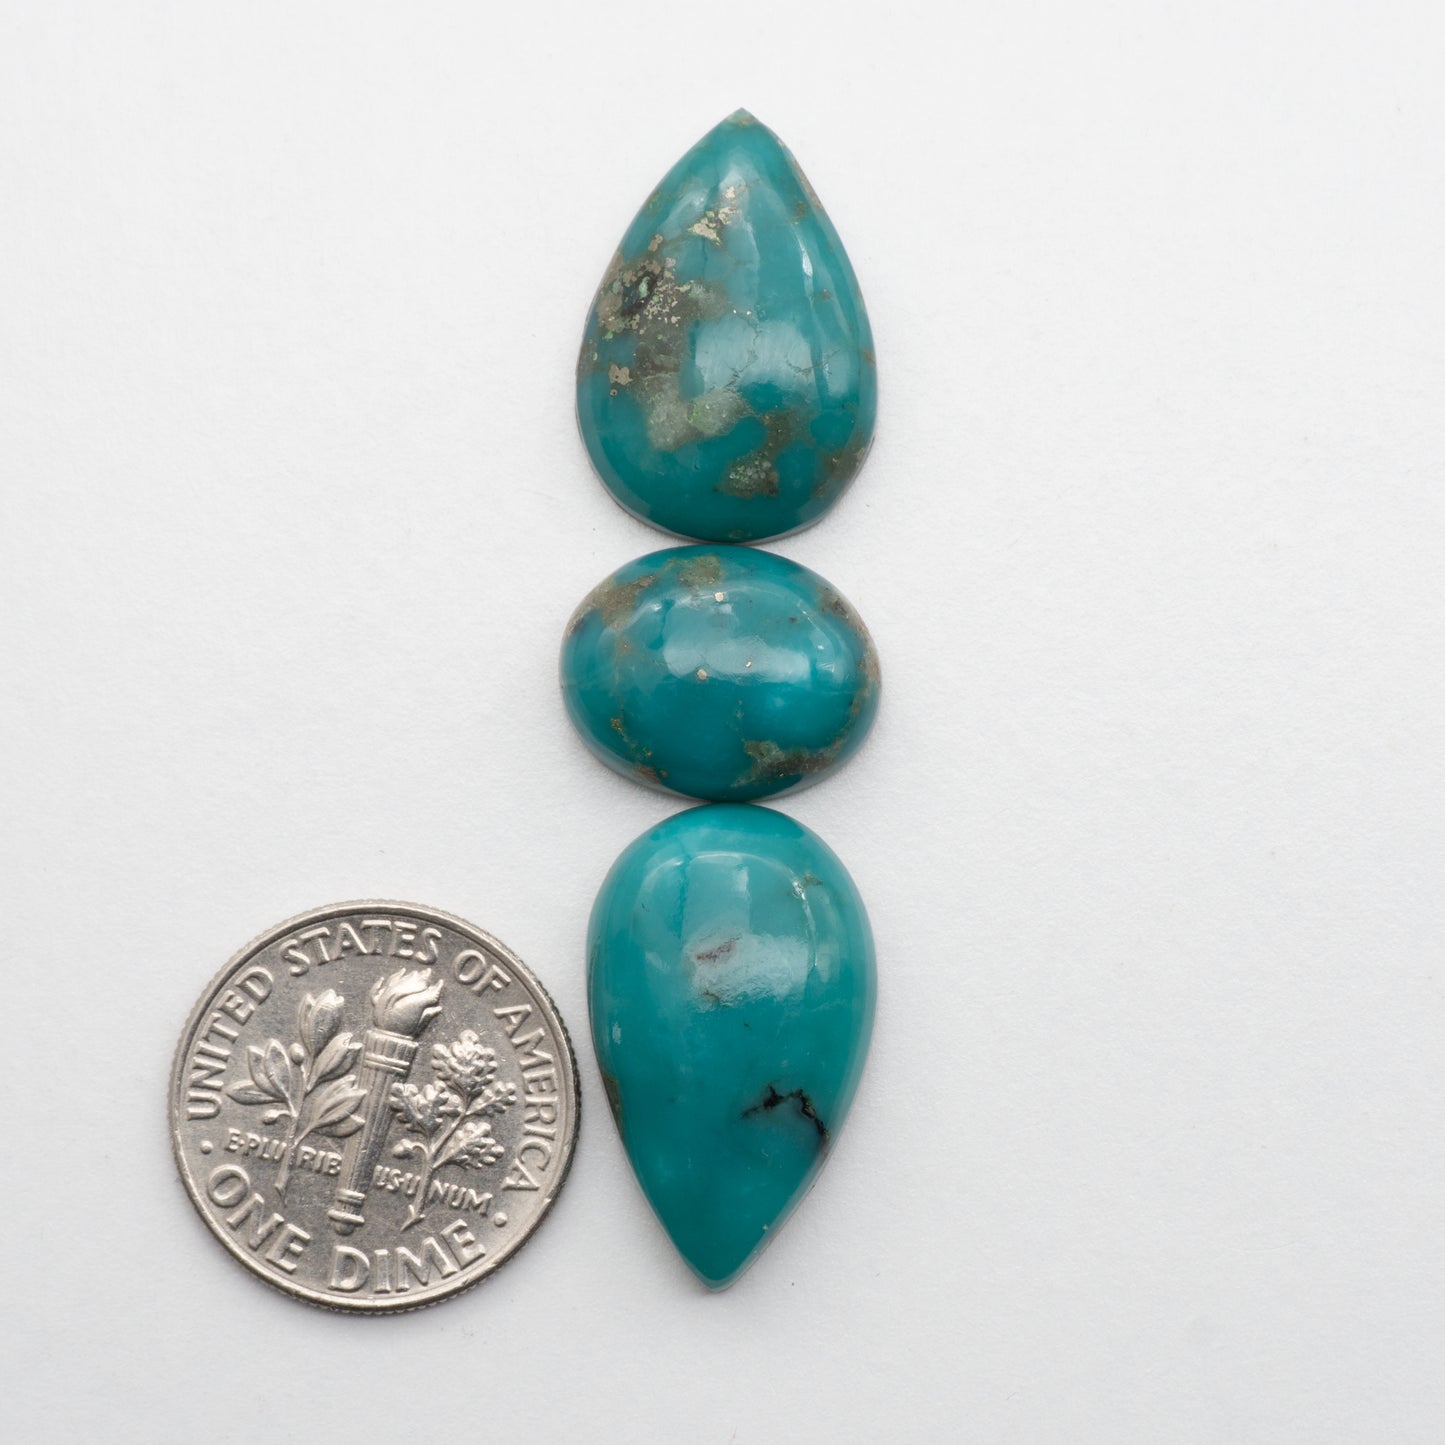 This beautiful Blue Green Campitos Turquoise Cabochon lot has a glossy finish and is backed for added strength. Mined in Sonora, MX. Similar to Kingman turquoise used for jewelry making.